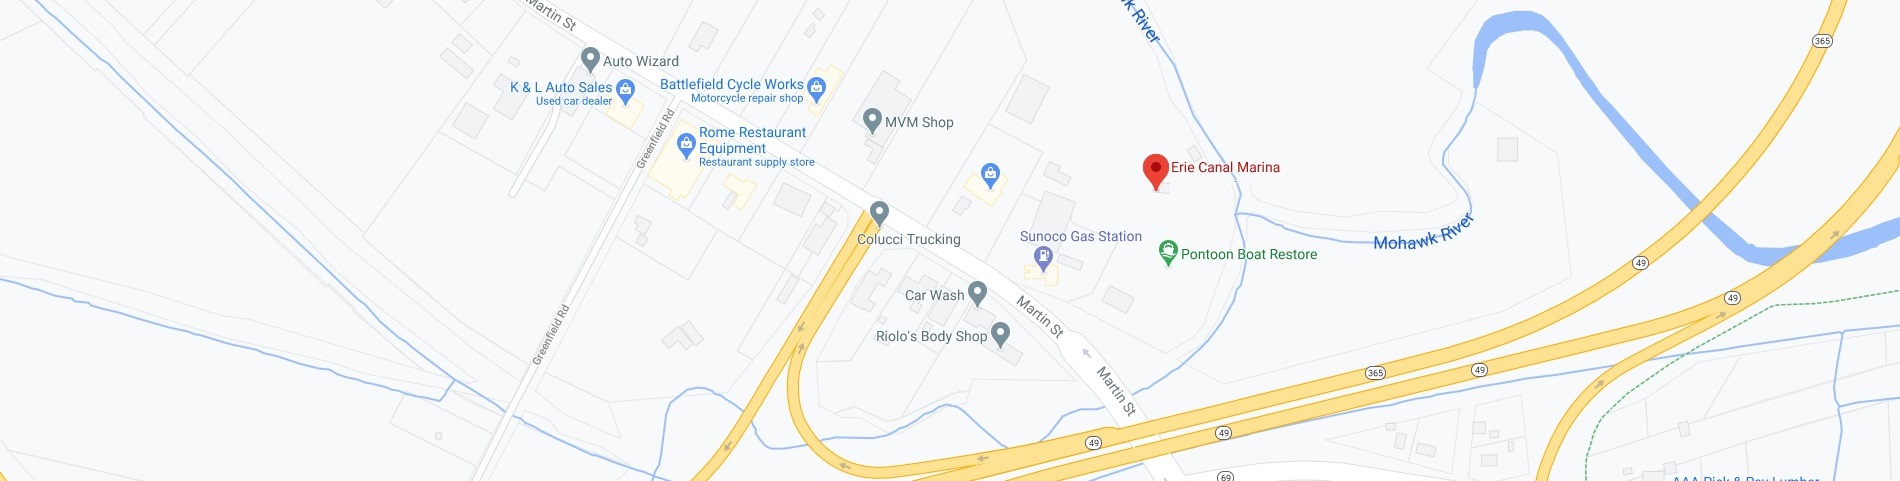 Road map of Erie Canel Marina.